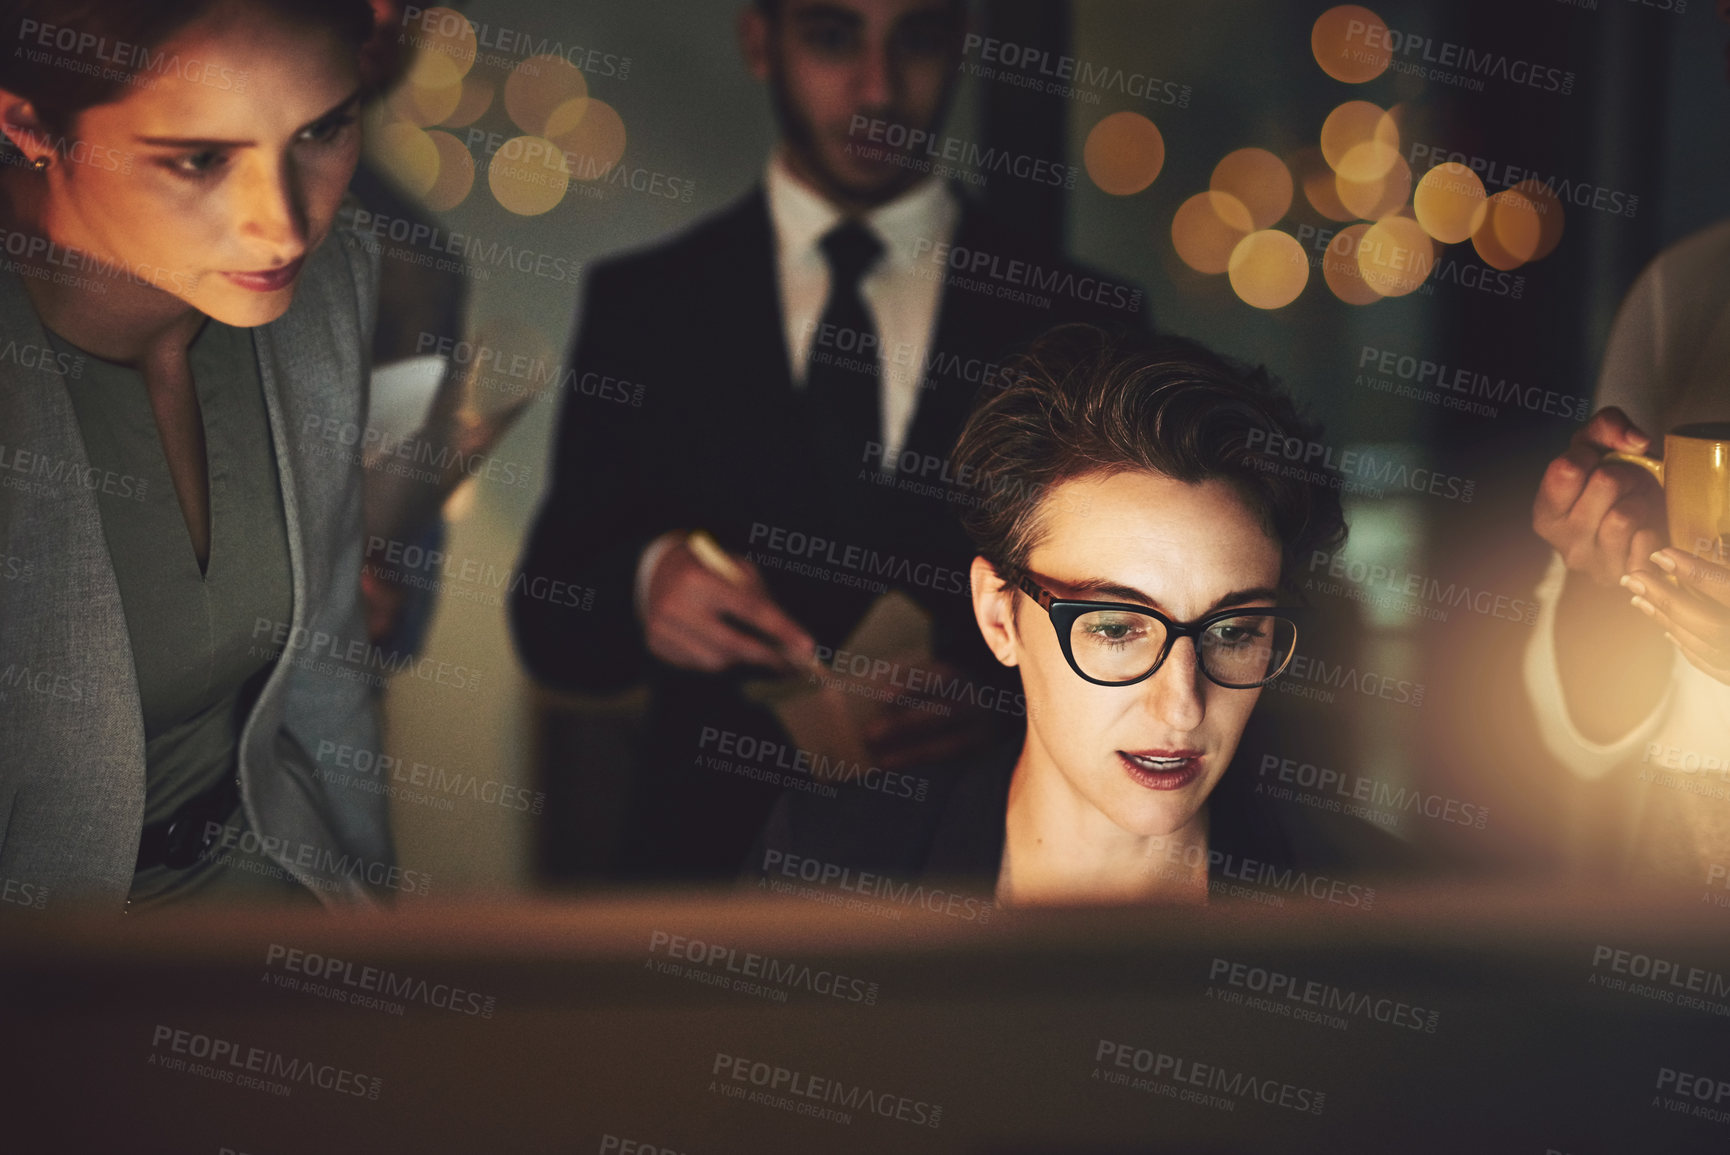 Buy stock photo Cropped shot of a young woman working late with colleagues standing in the background